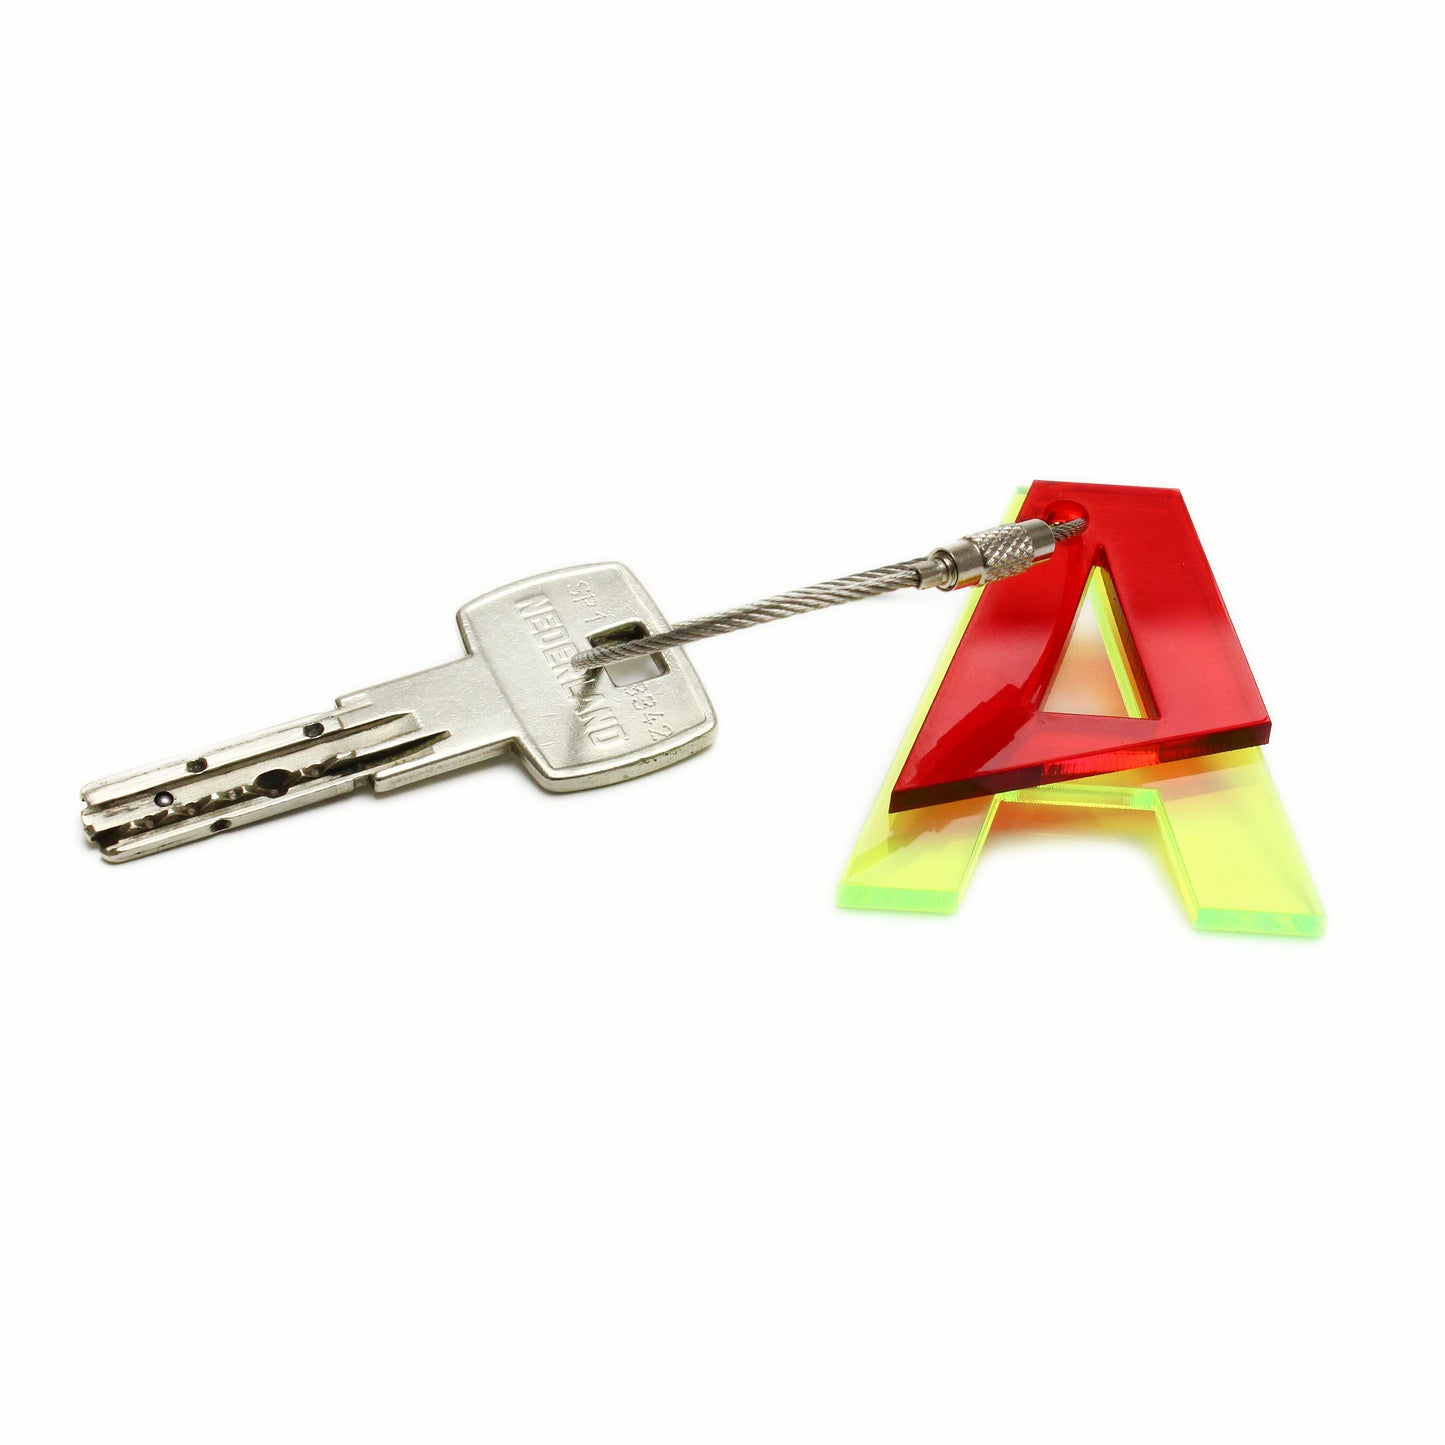 A – RECYCLED KEY CHAIN ABC by mo man tai